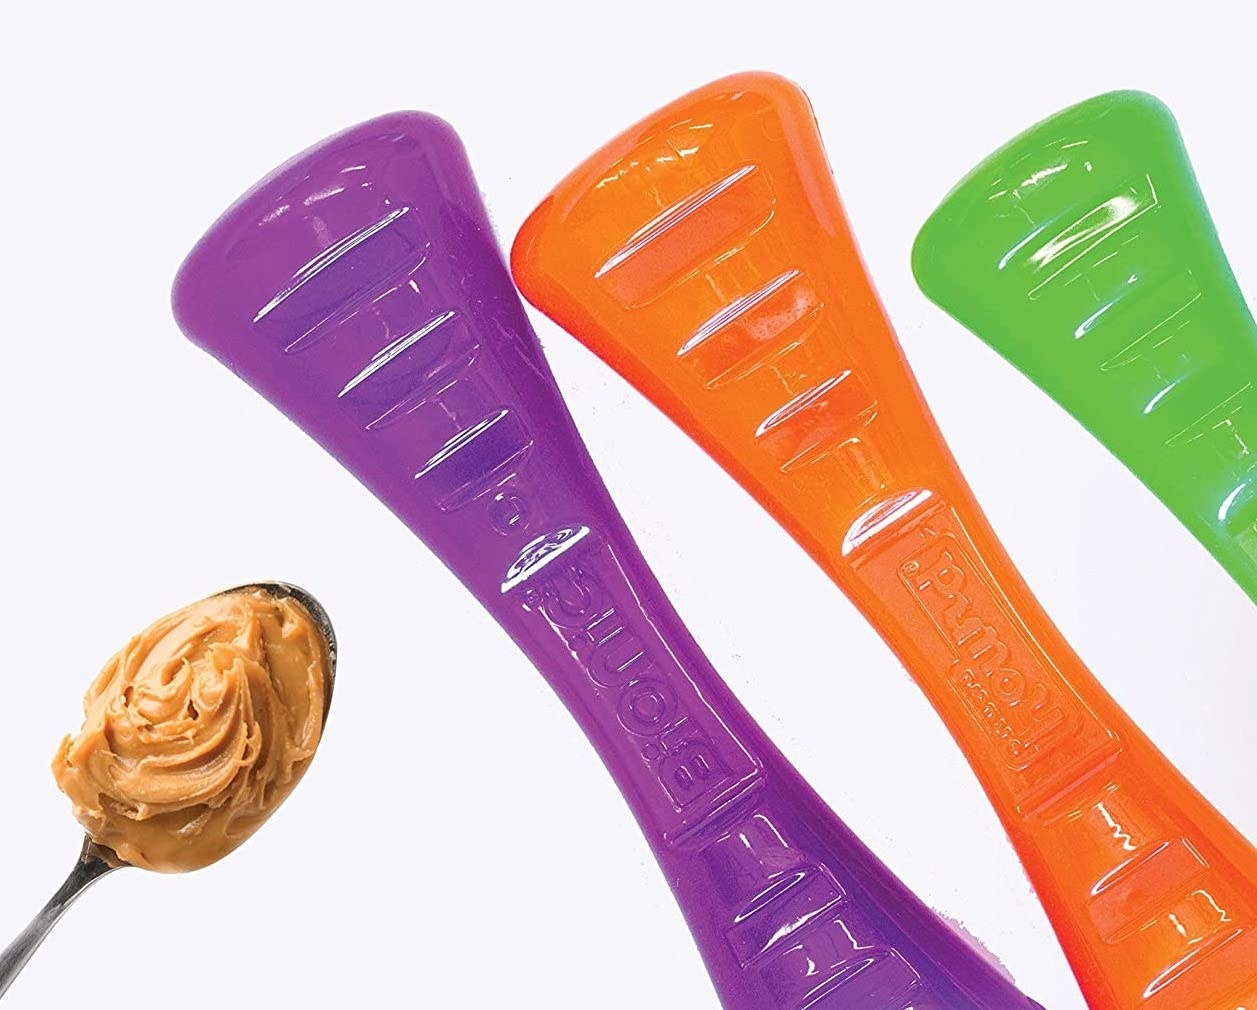 three of the rubberized looking throwing sticks in purple, orange, and green